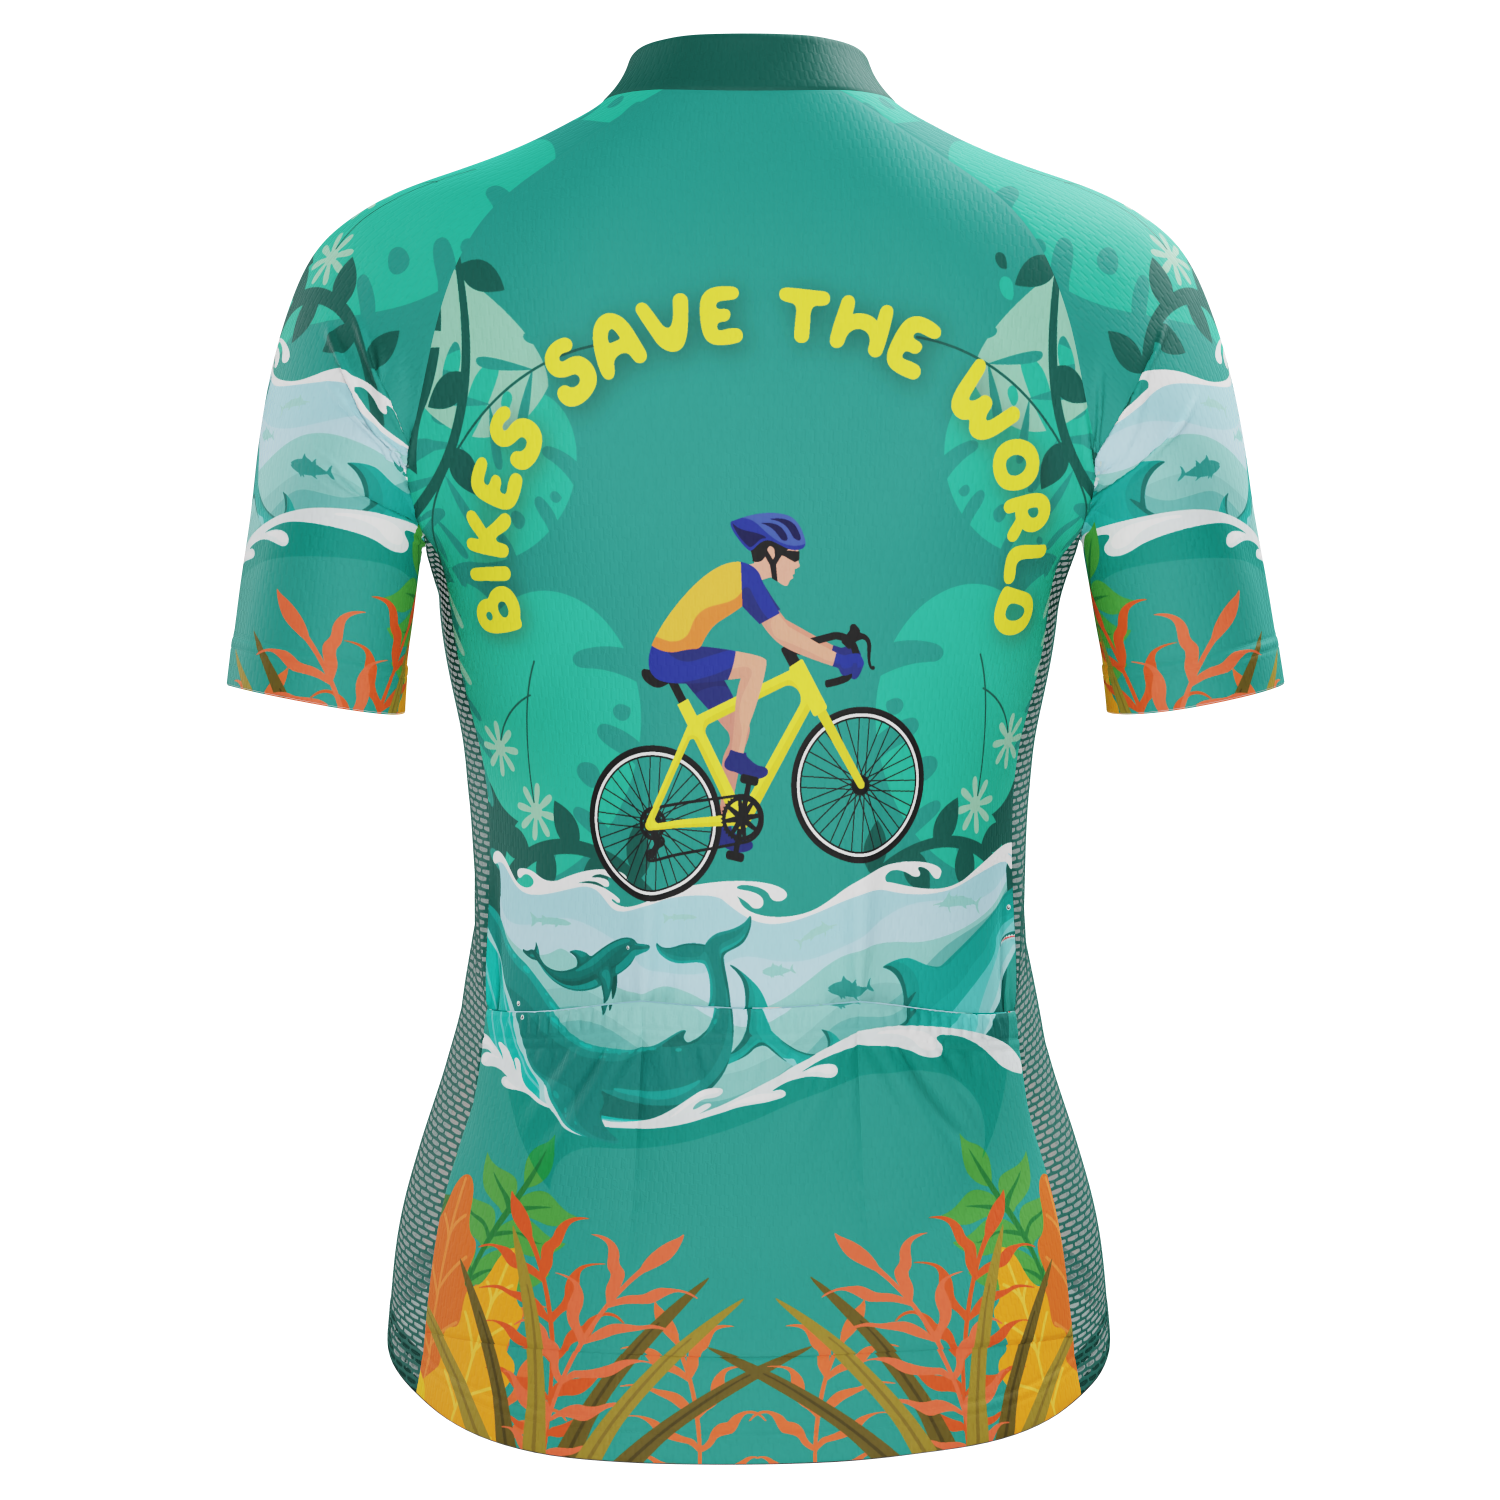 Women's Bikes Save The World Short Sleeve Cycling Jersey